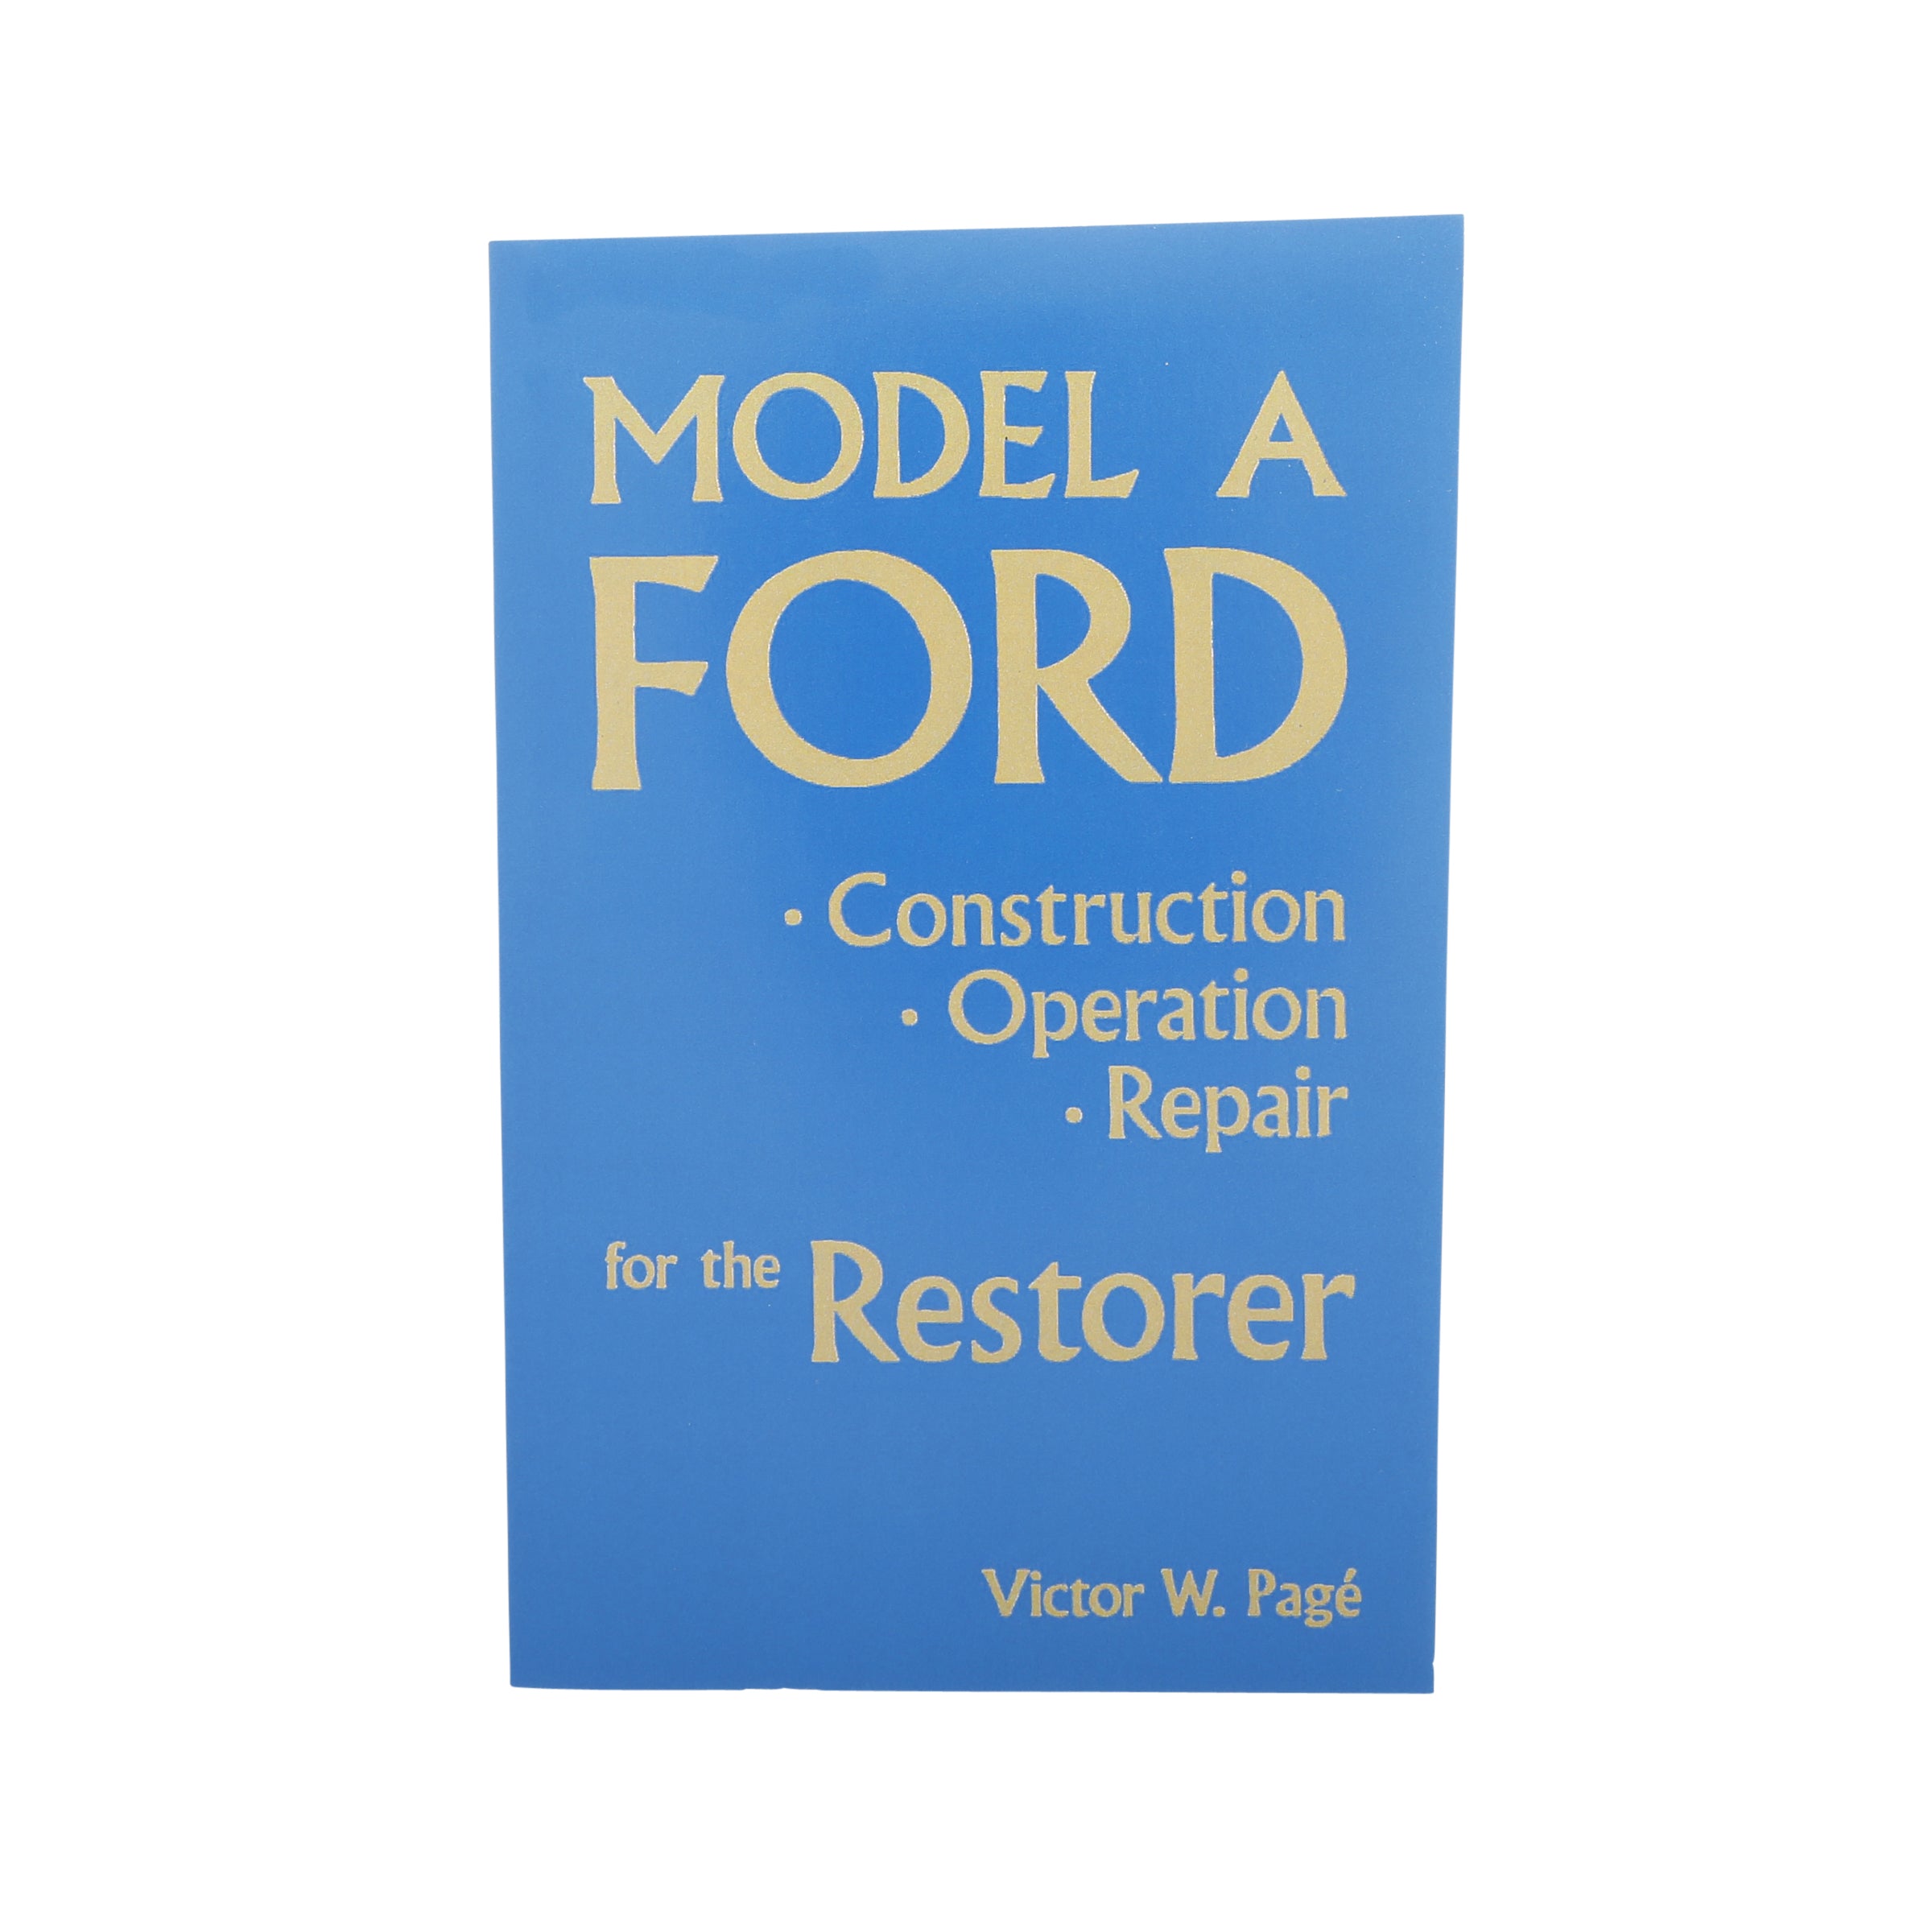 Model A Ford Construction and Operation